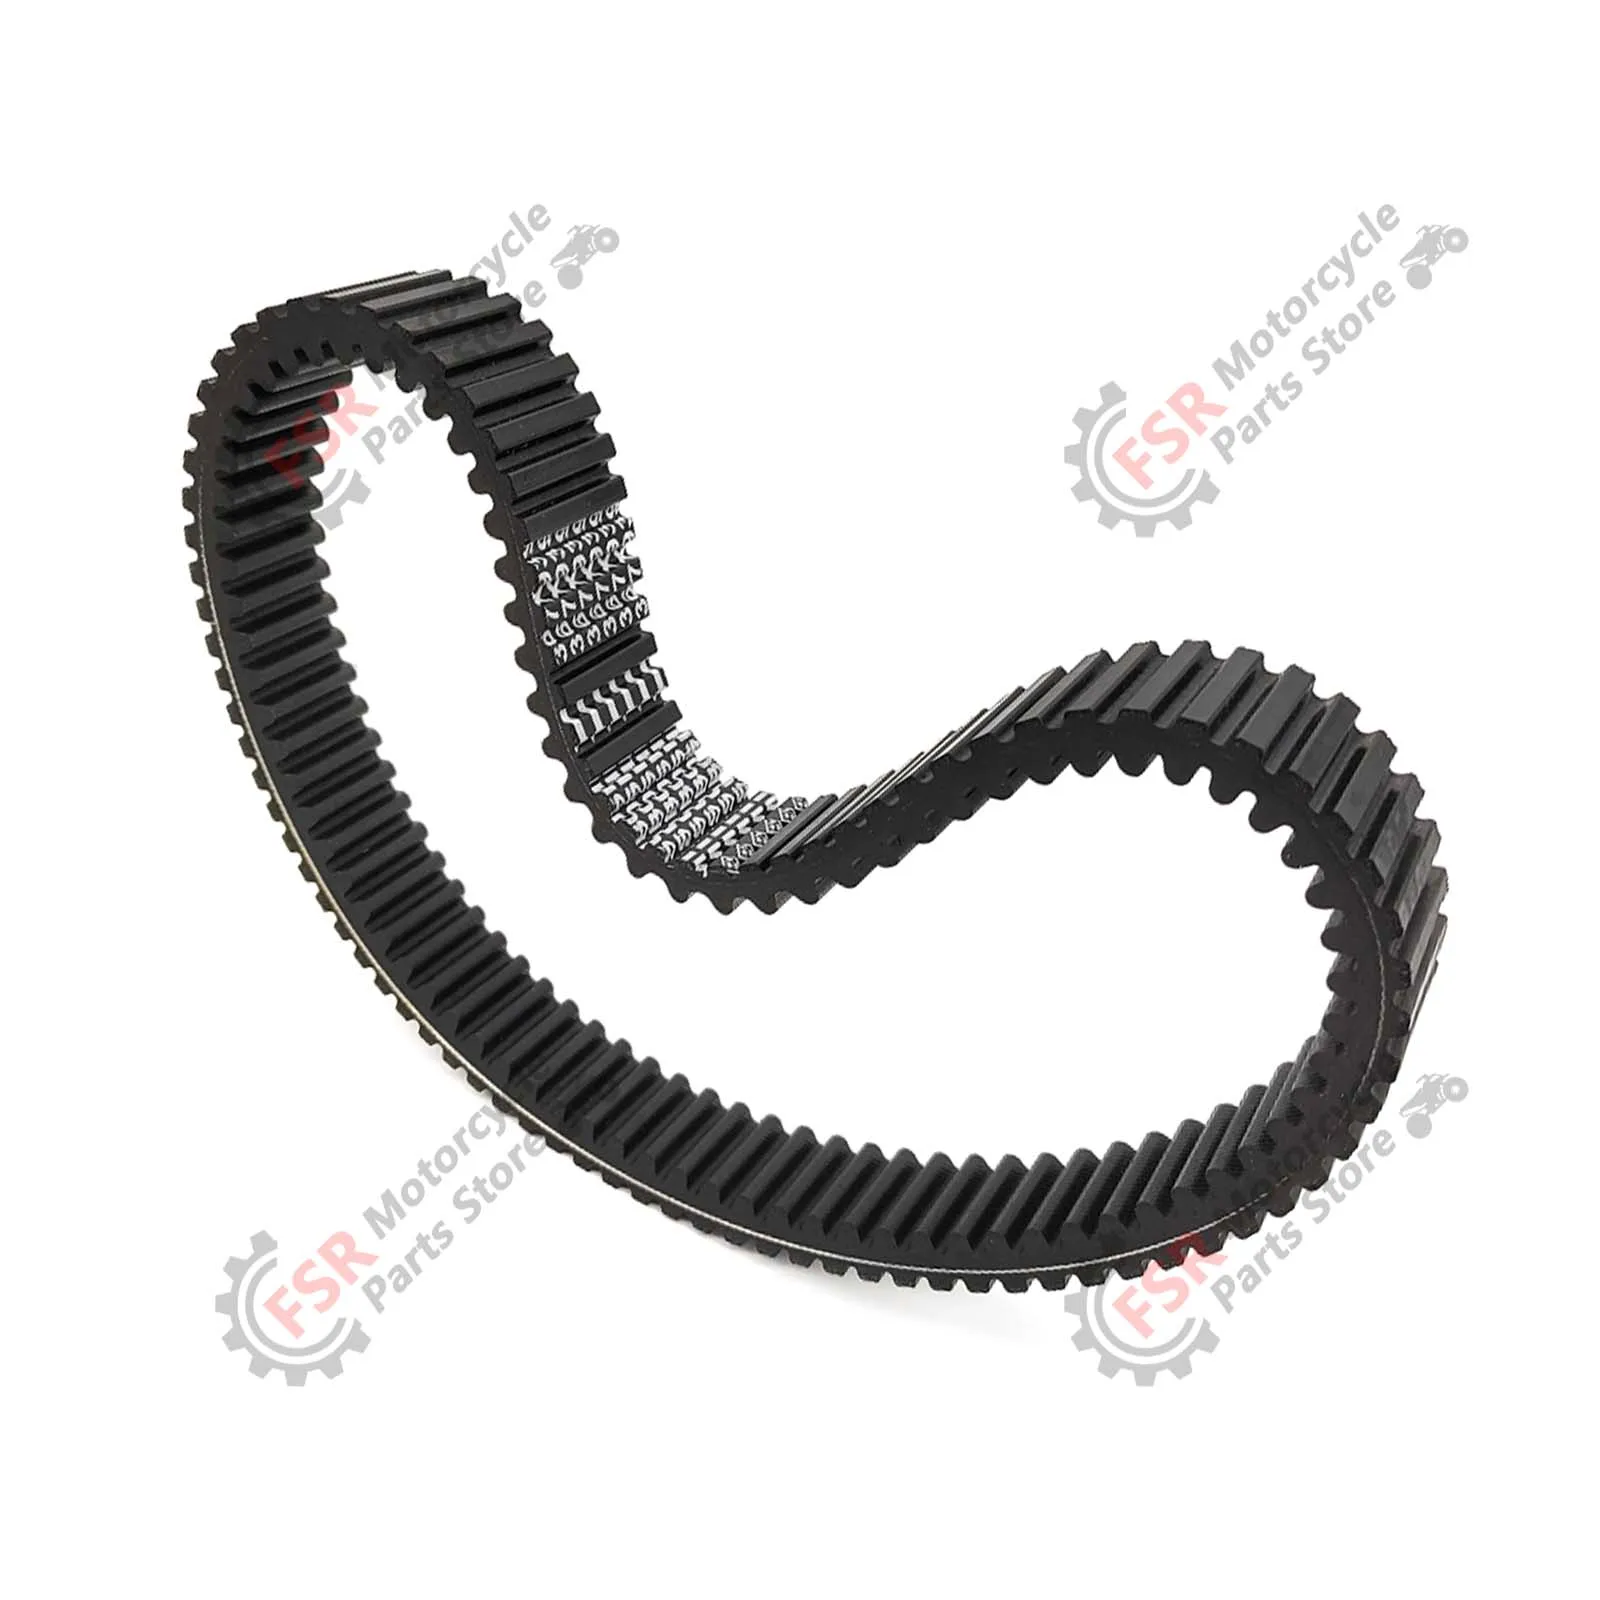 Transmission belt suitable for Dongfeng 500 ATV, farmer's vehicle, motorcycle 0180-055000-0001 Made in China auto transmission 0am tcu tcm dq200 tcu tcm 0am927769k 0am927769g new parts original made in china